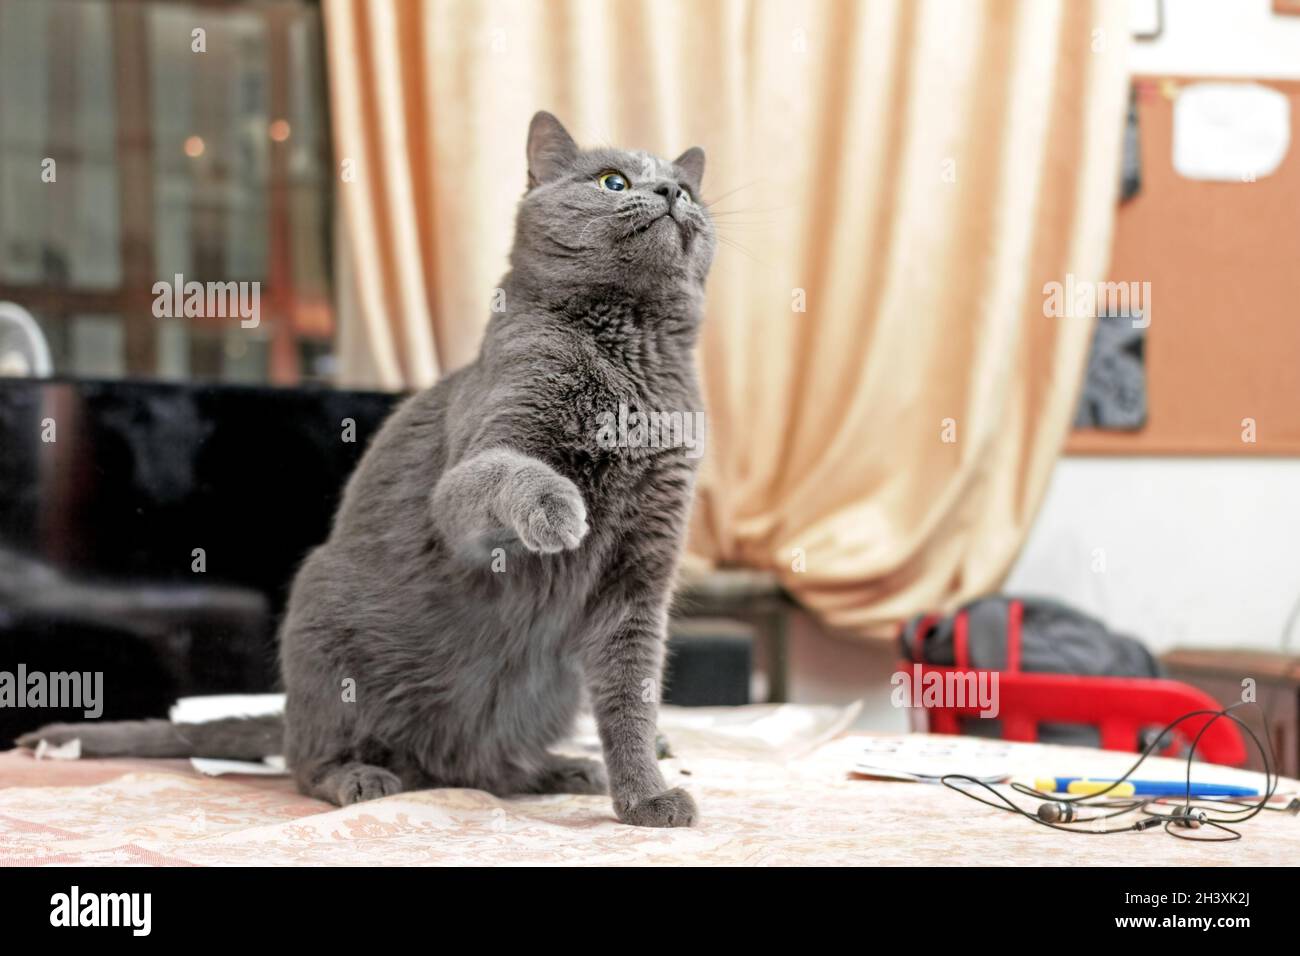 Real pretty adult light gray cat raised its front paw on table Stock Photo